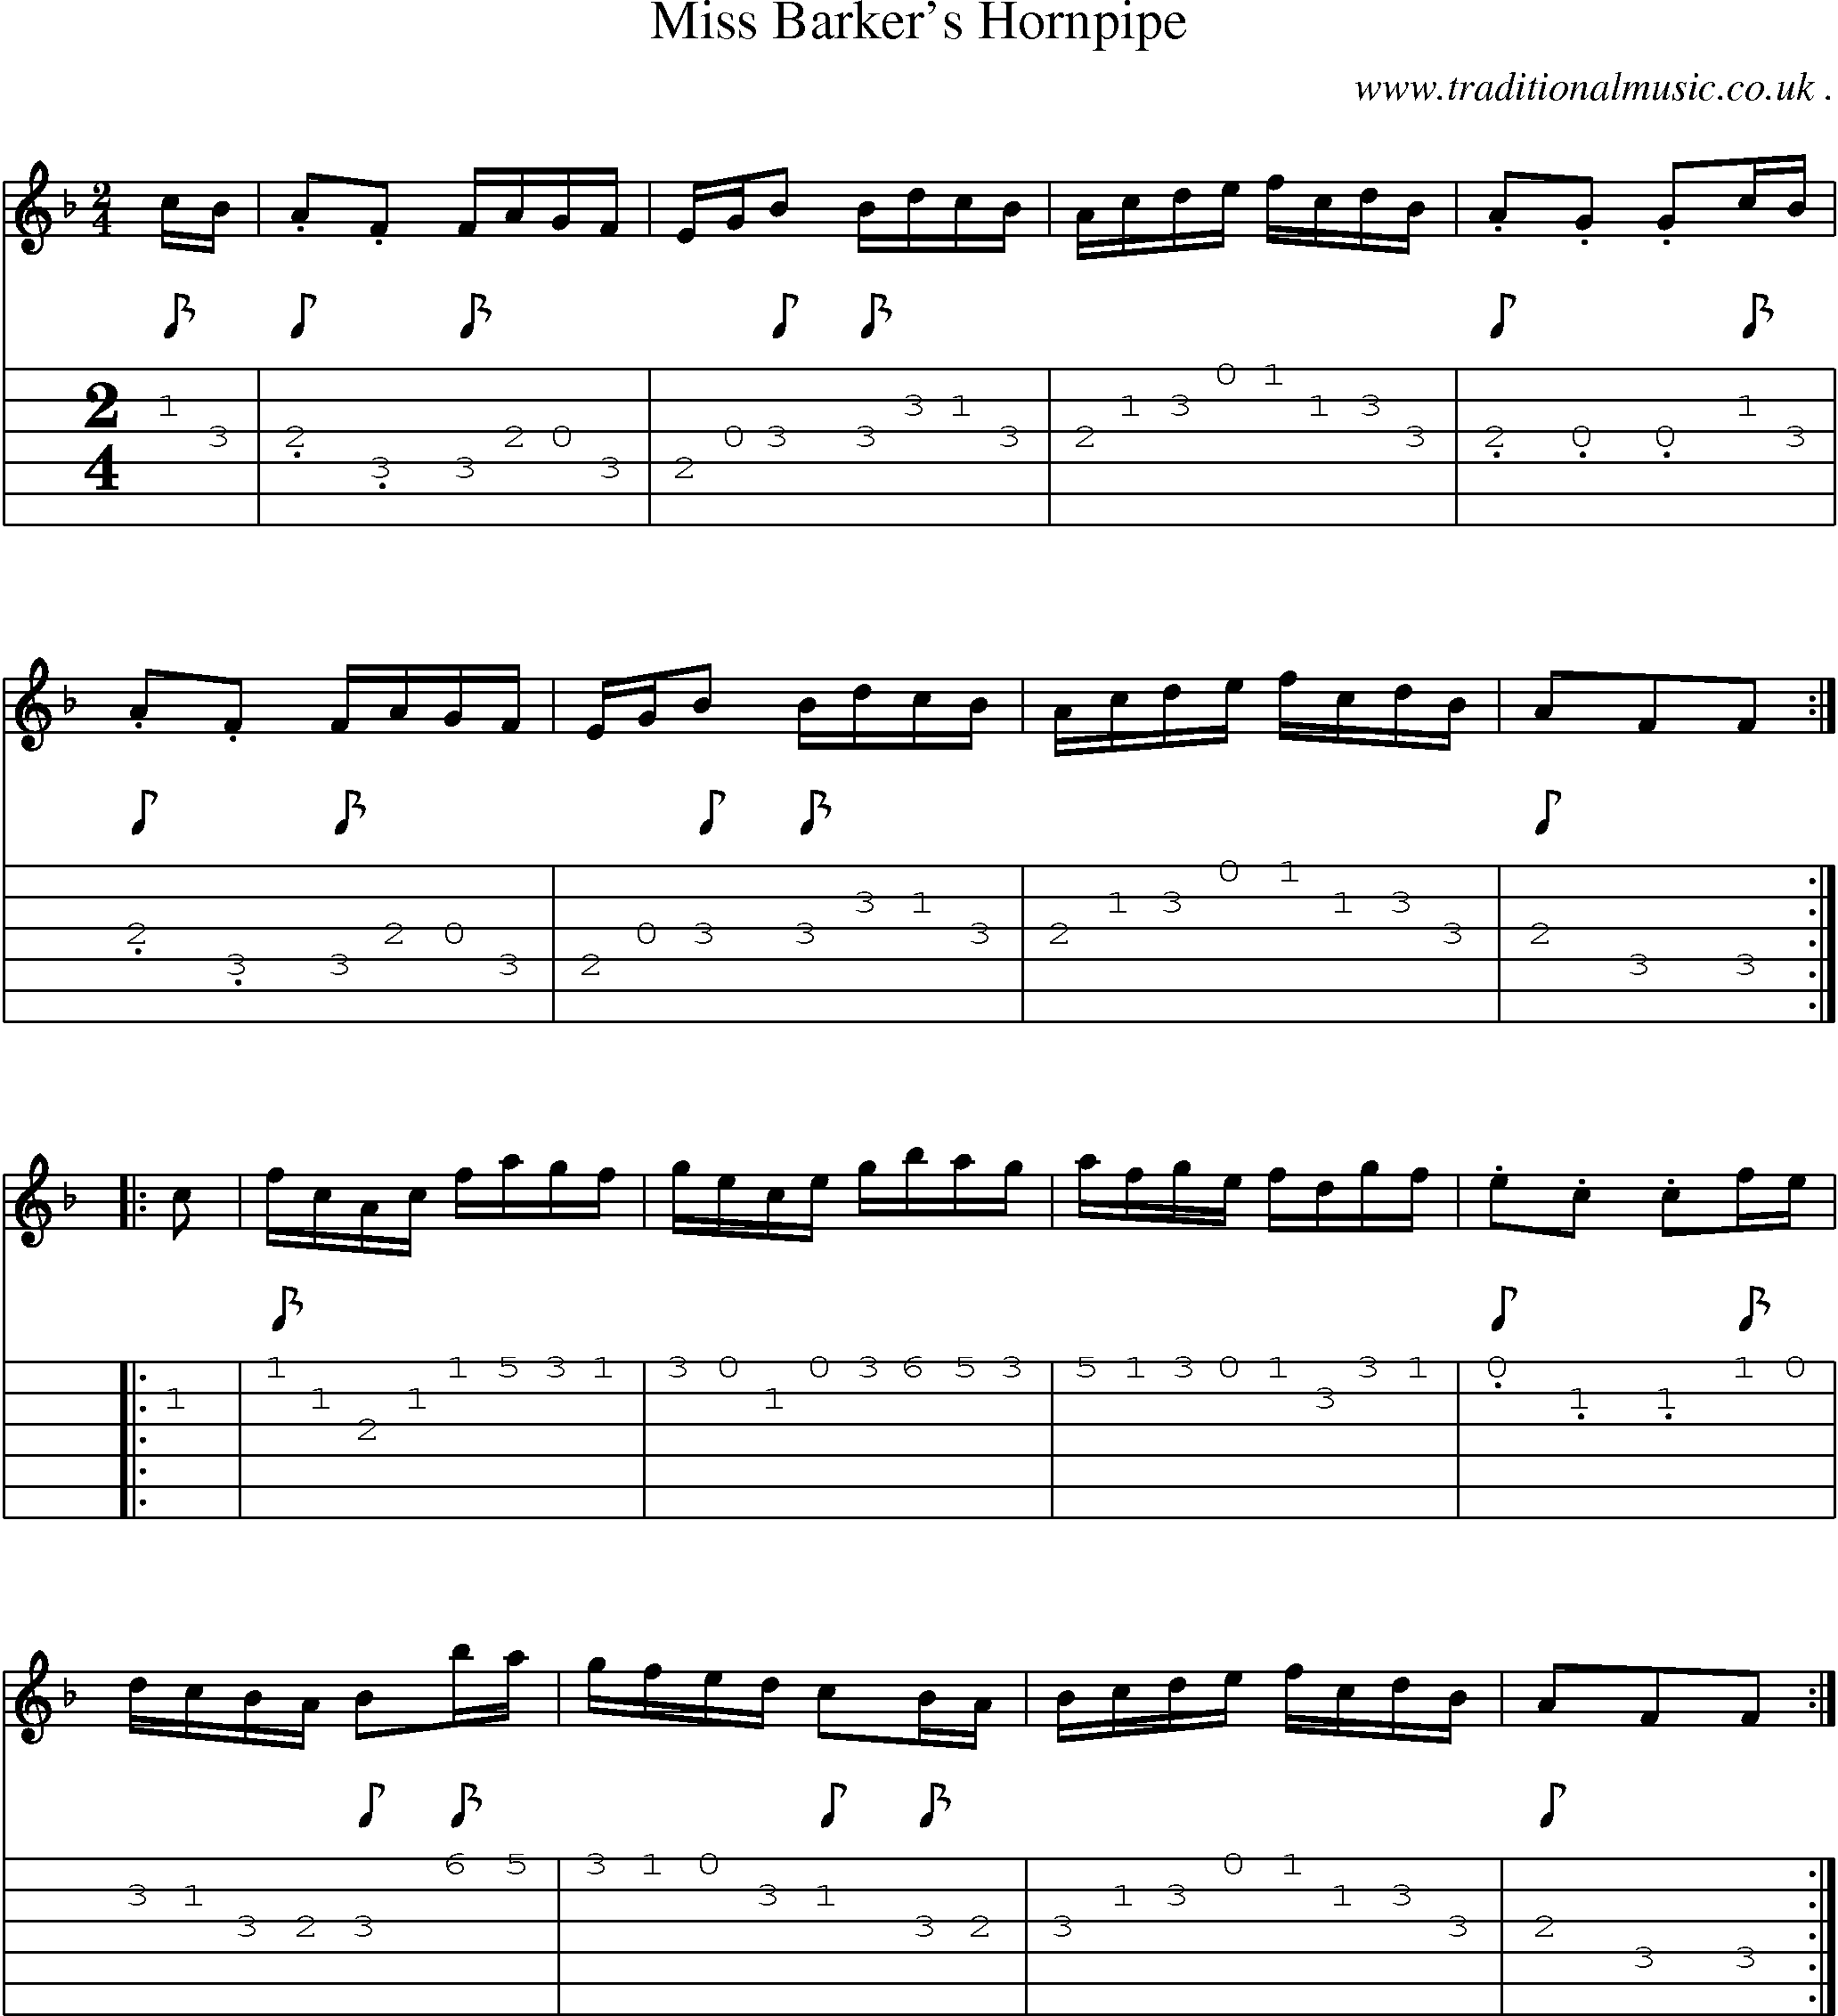 Sheet-Music and Guitar Tabs for Miss Barkers Hornpipe